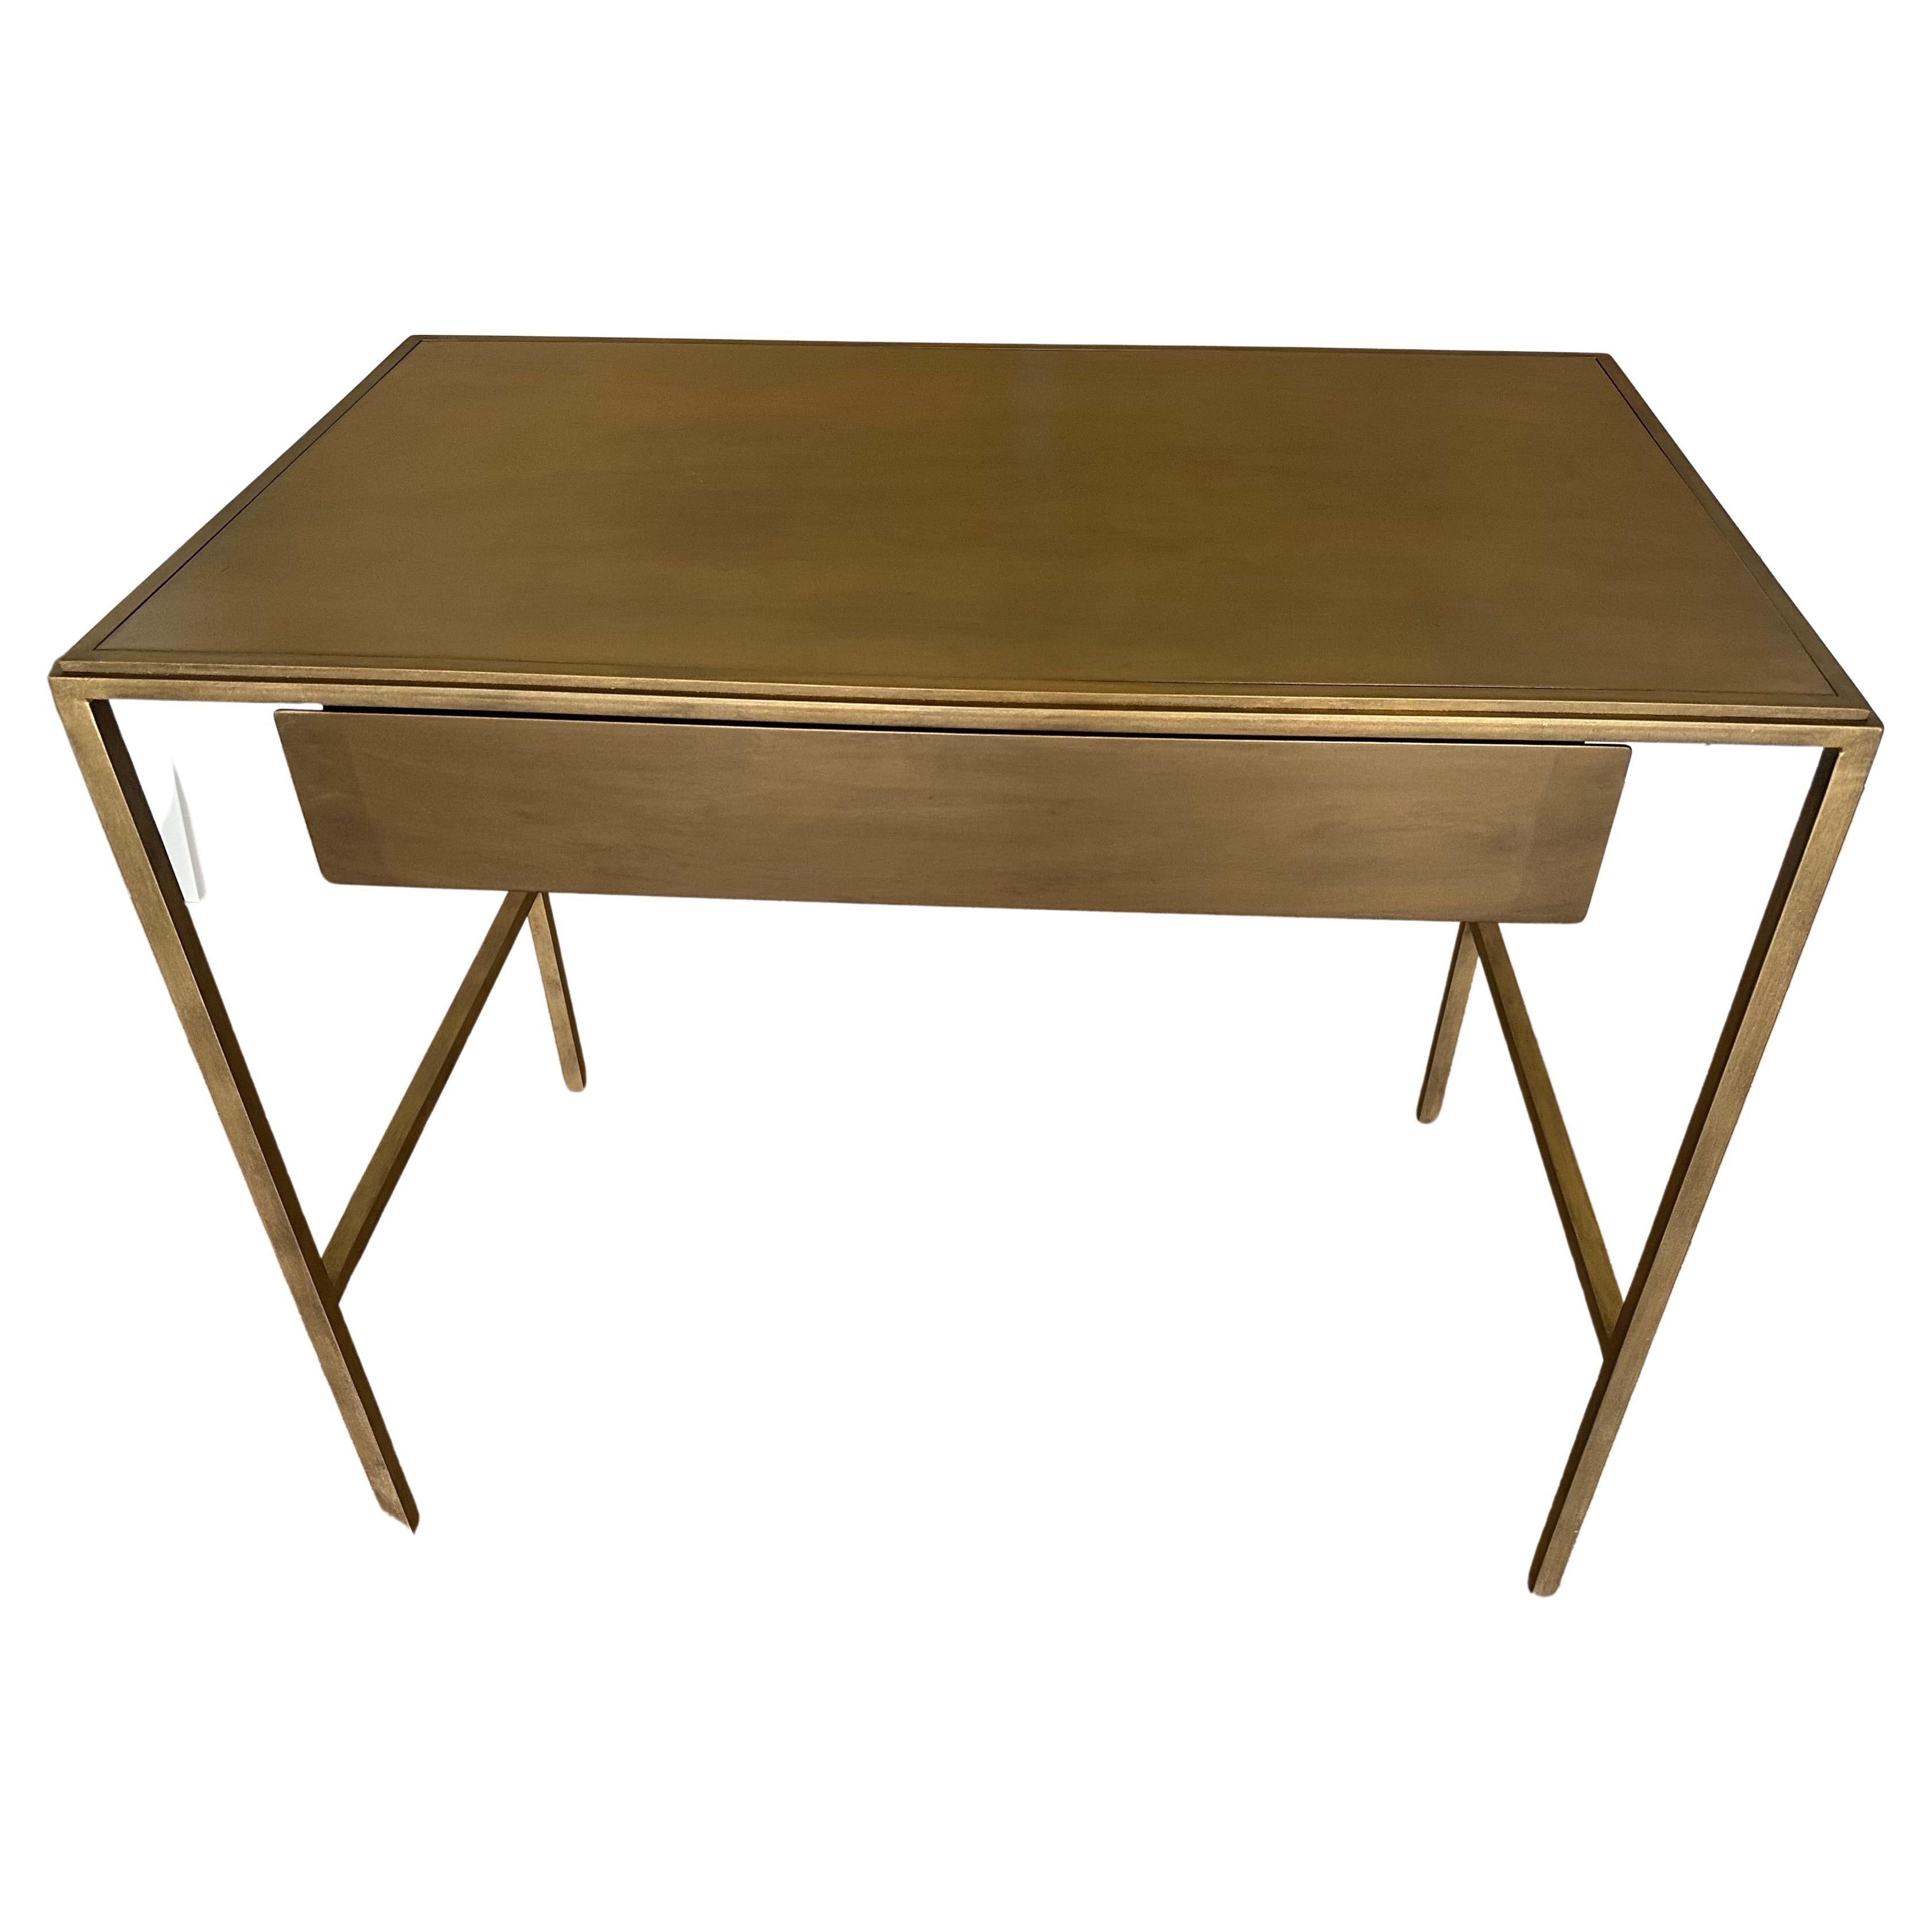 Custom made and designed by us. this versatile modern and traditional styled piece can be used as end table, vanity, desk or dressing table. Table has distressed metal top insert and a drawer. Matching vanity stool available. Can work well in